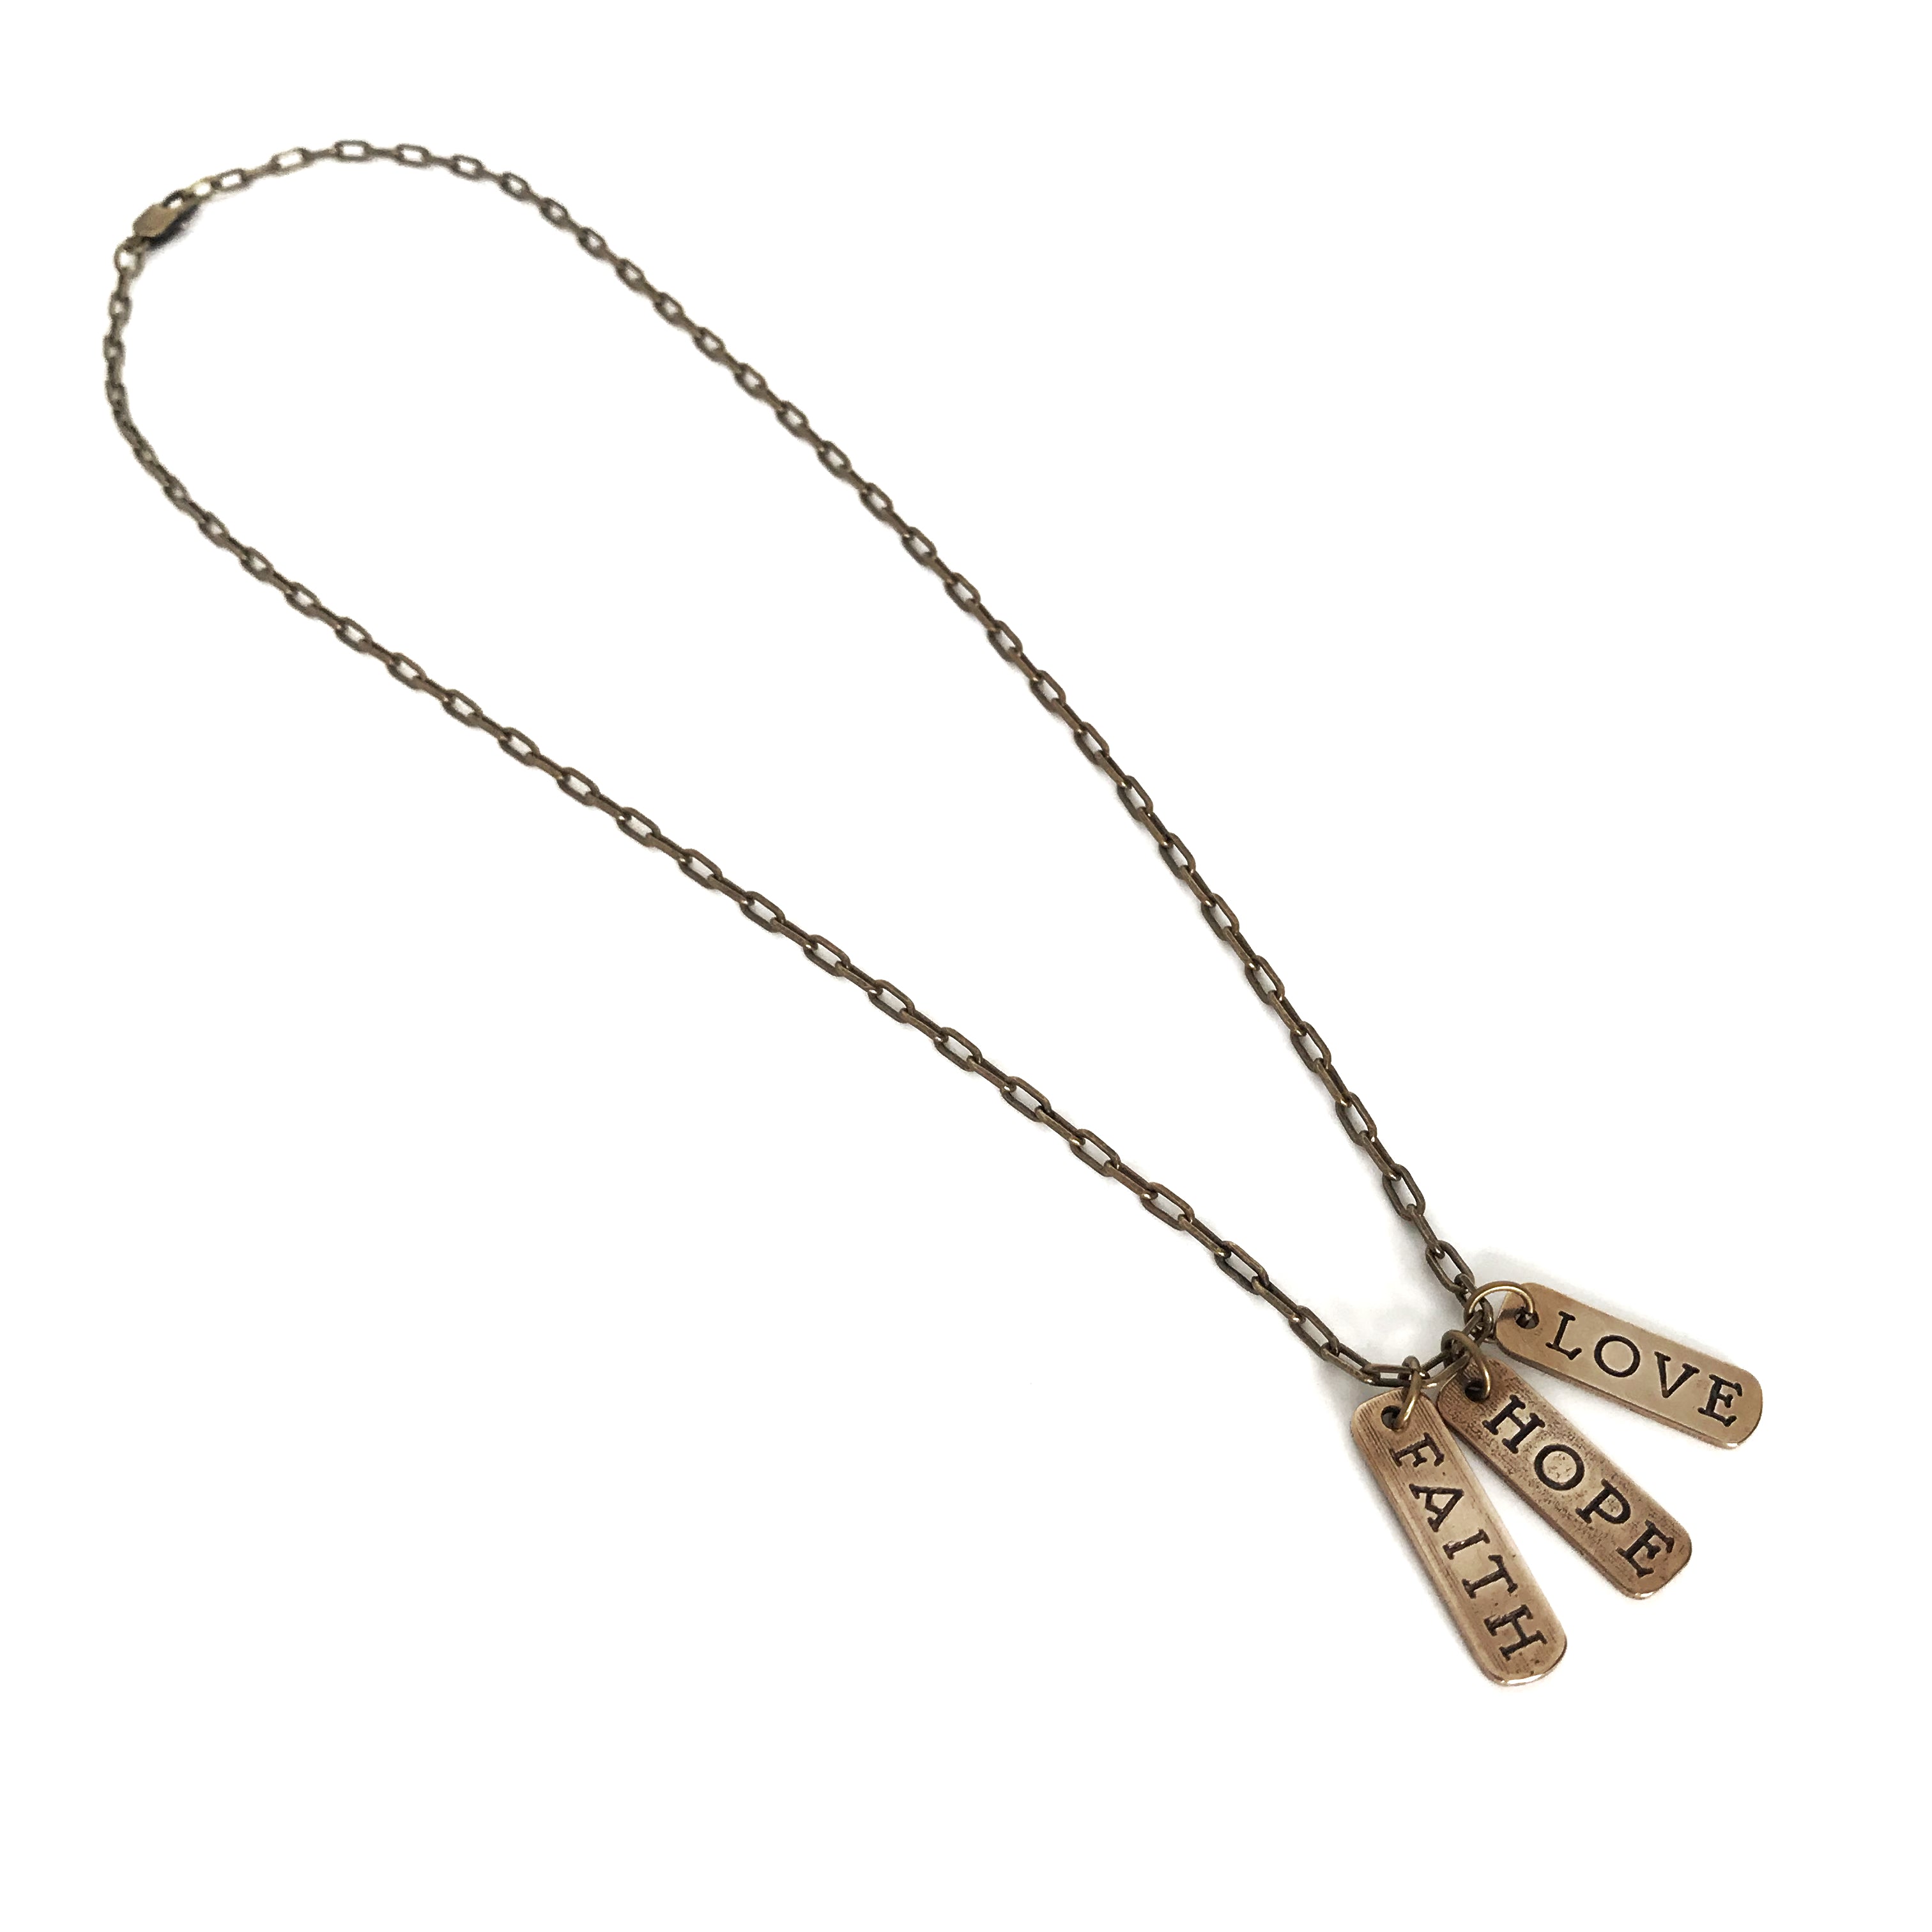 FAITH, HOPE, LOVE Words of Honor Necklace - Bronze